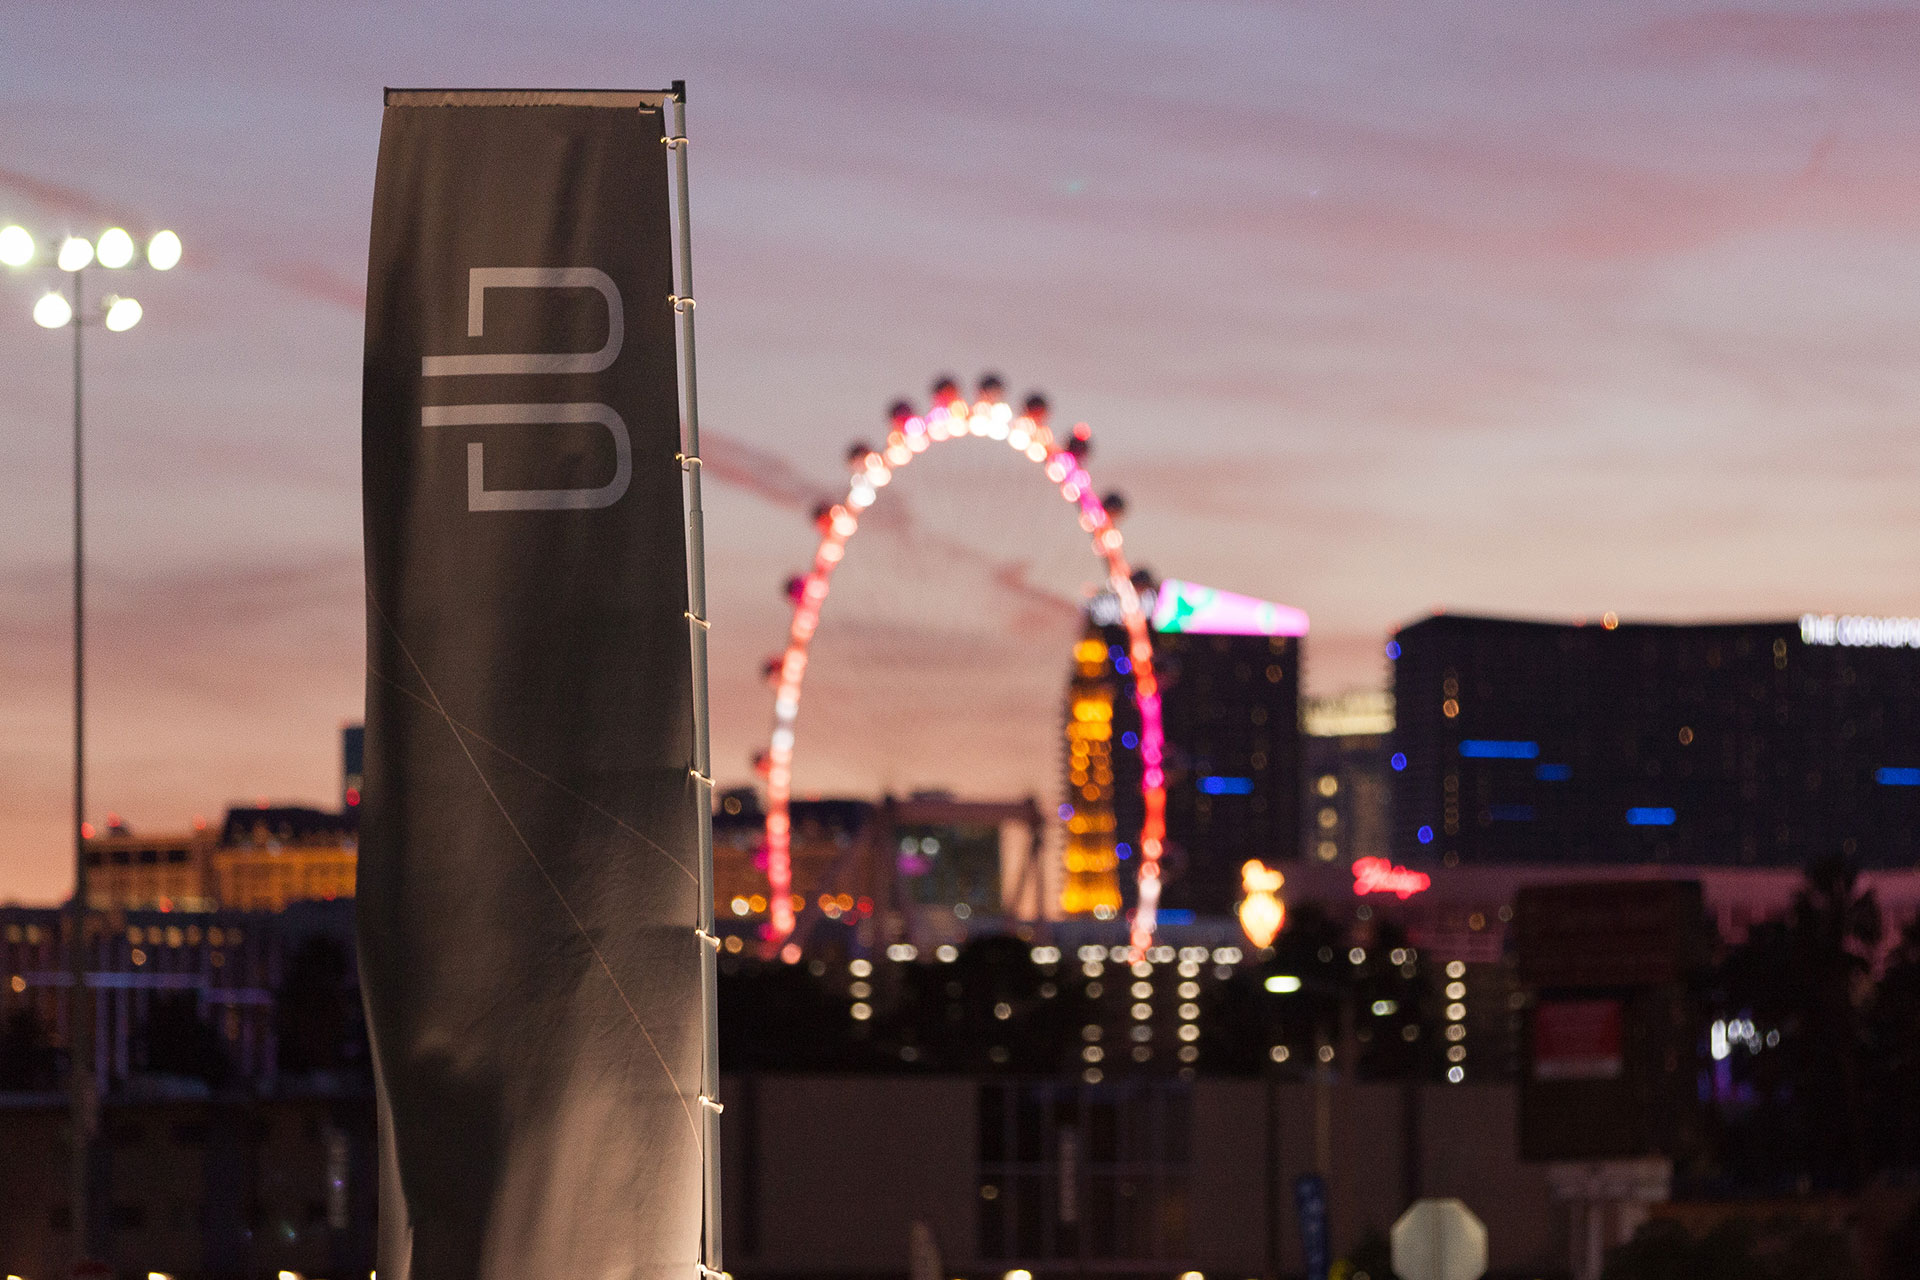 The white B of the Byton logo on a grey banner flapping in the wind in front of the High Roller Ferris Wheel and Casinos of the Las Vegas Strip at dusk.